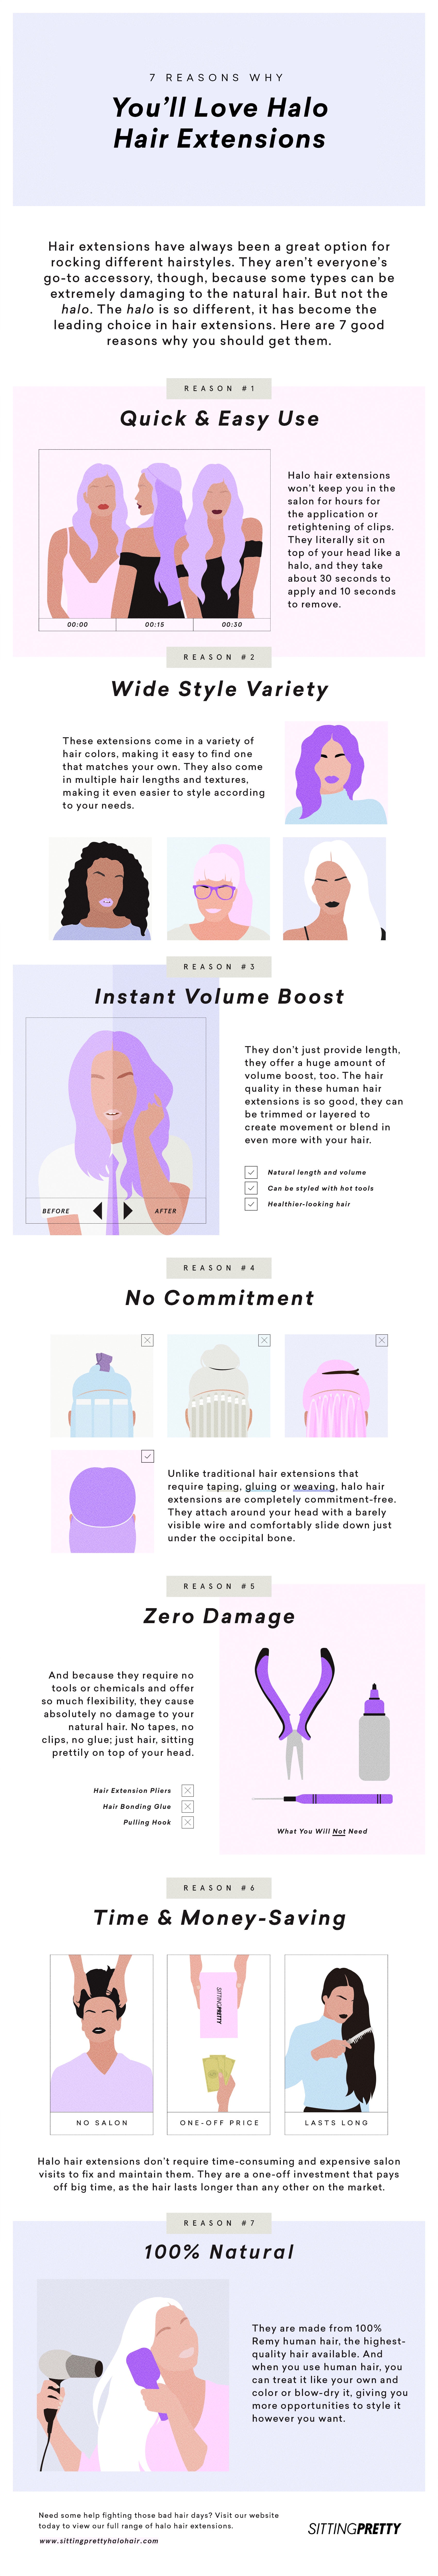 why halo hair extensions are the best type of hair extension